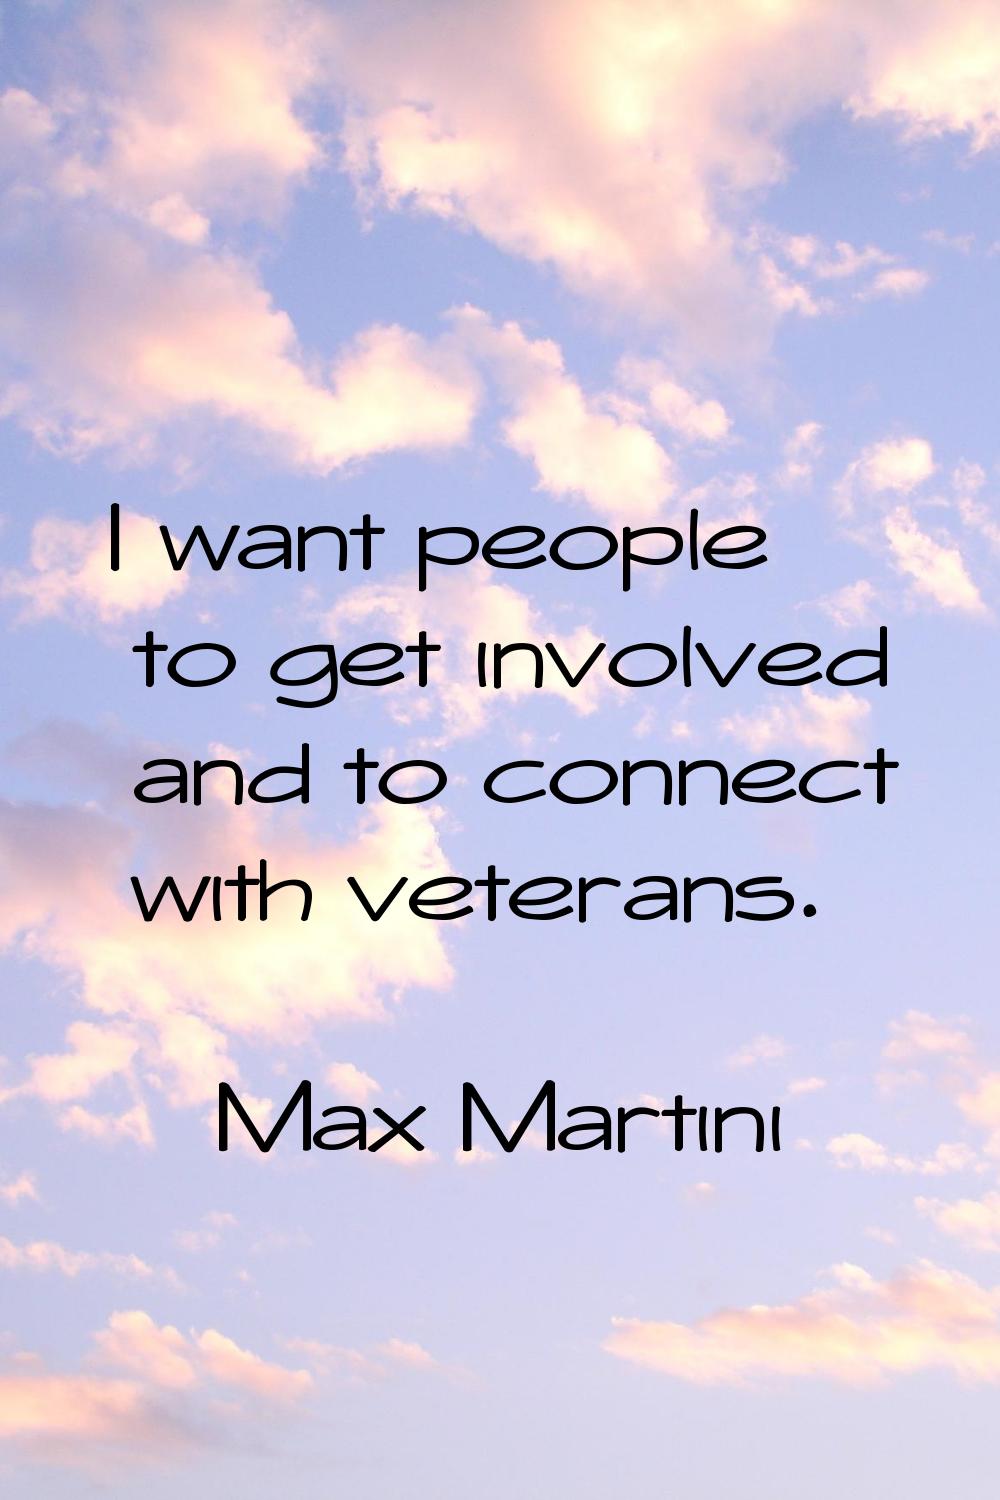 I want people to get involved and to connect with veterans.